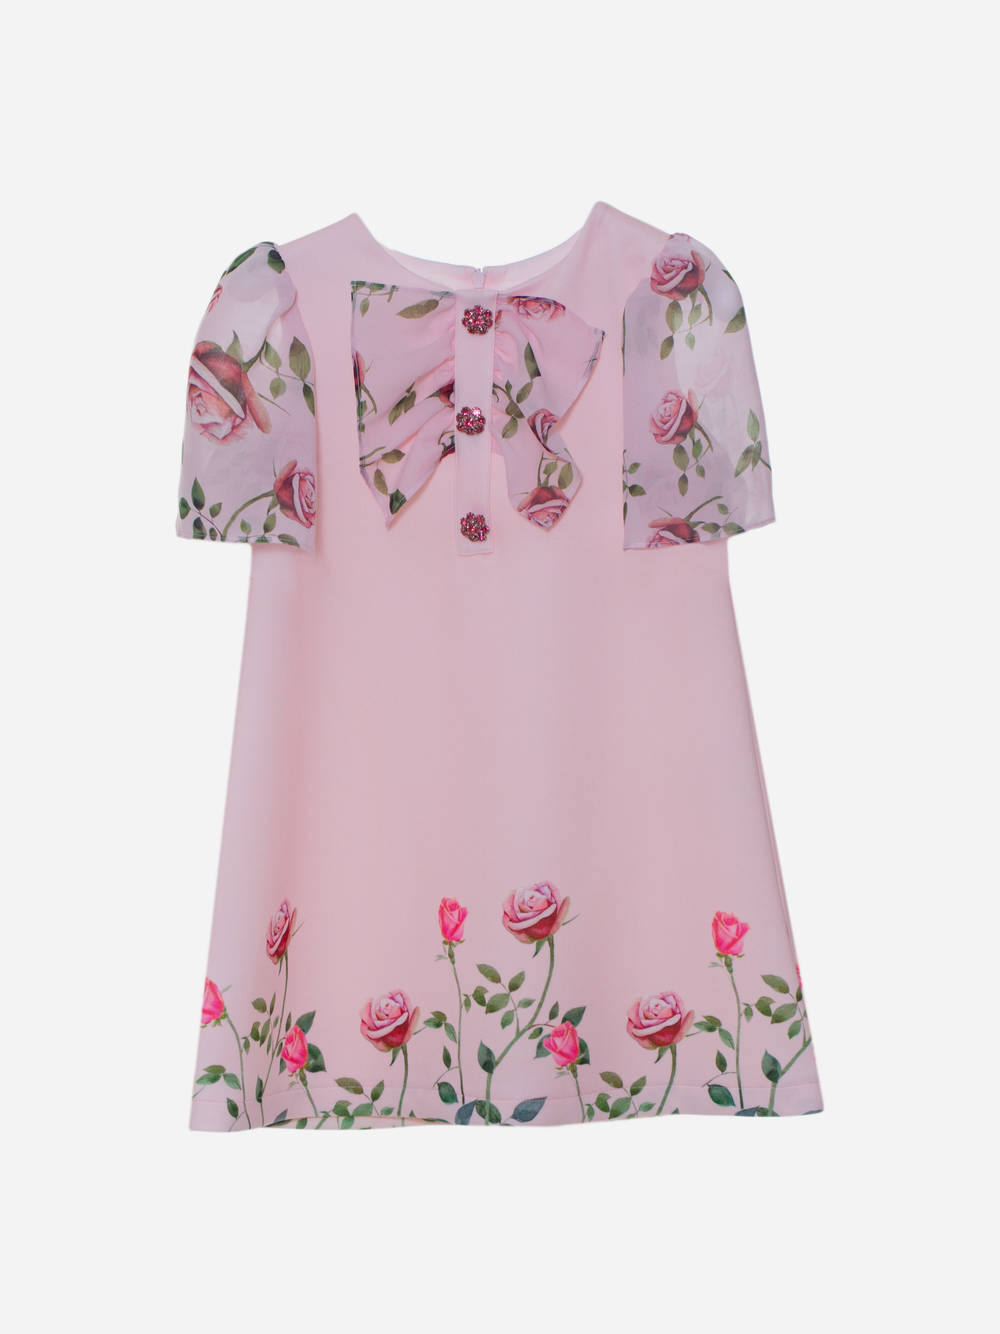 Girls dress in pink with flowers